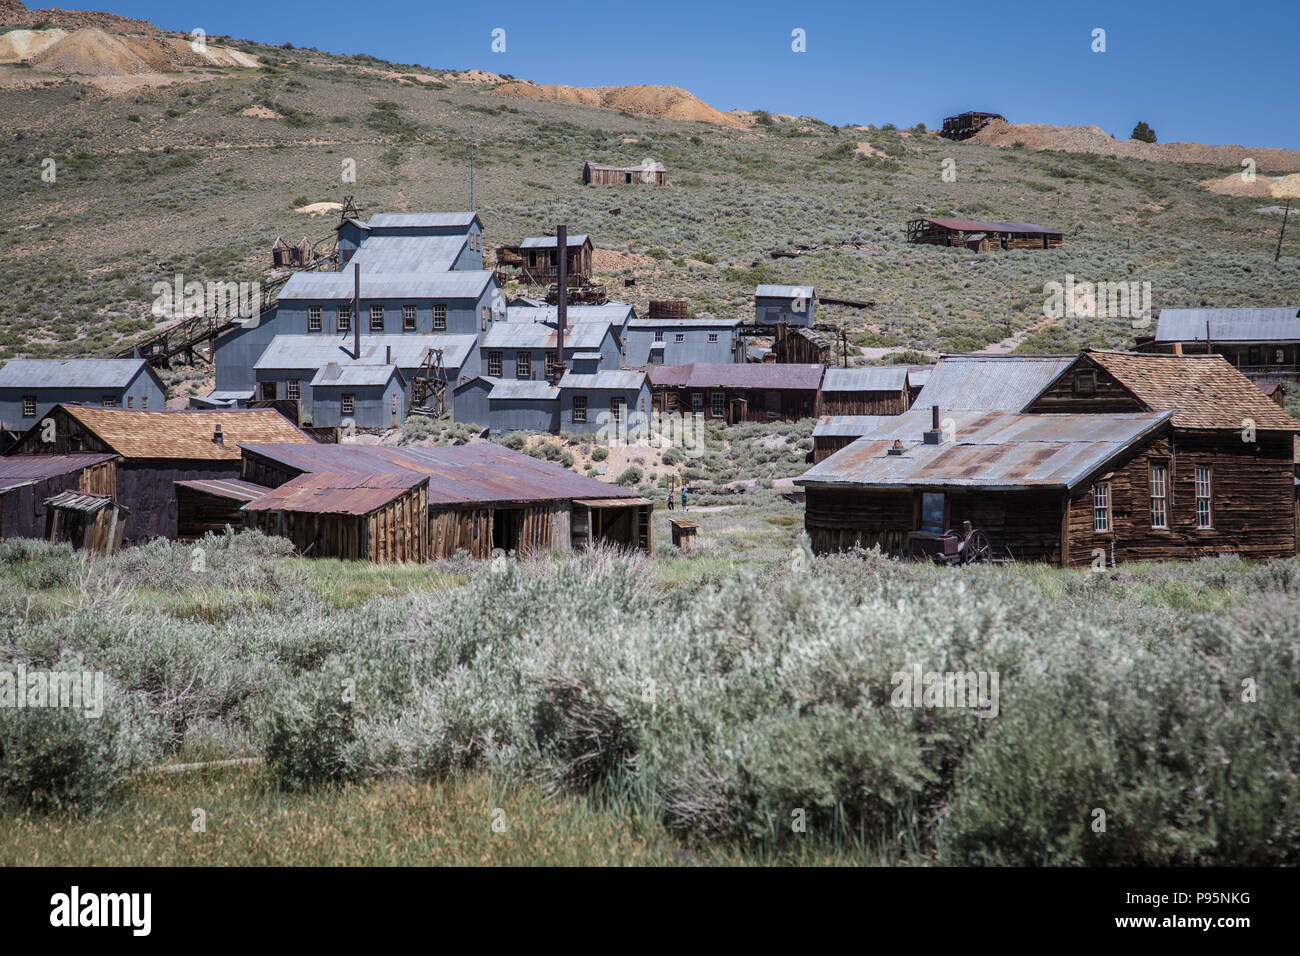 The abandoned town and mine of Bodie, California, the best preserved abandoned ghost town in the United States. Stock Photo